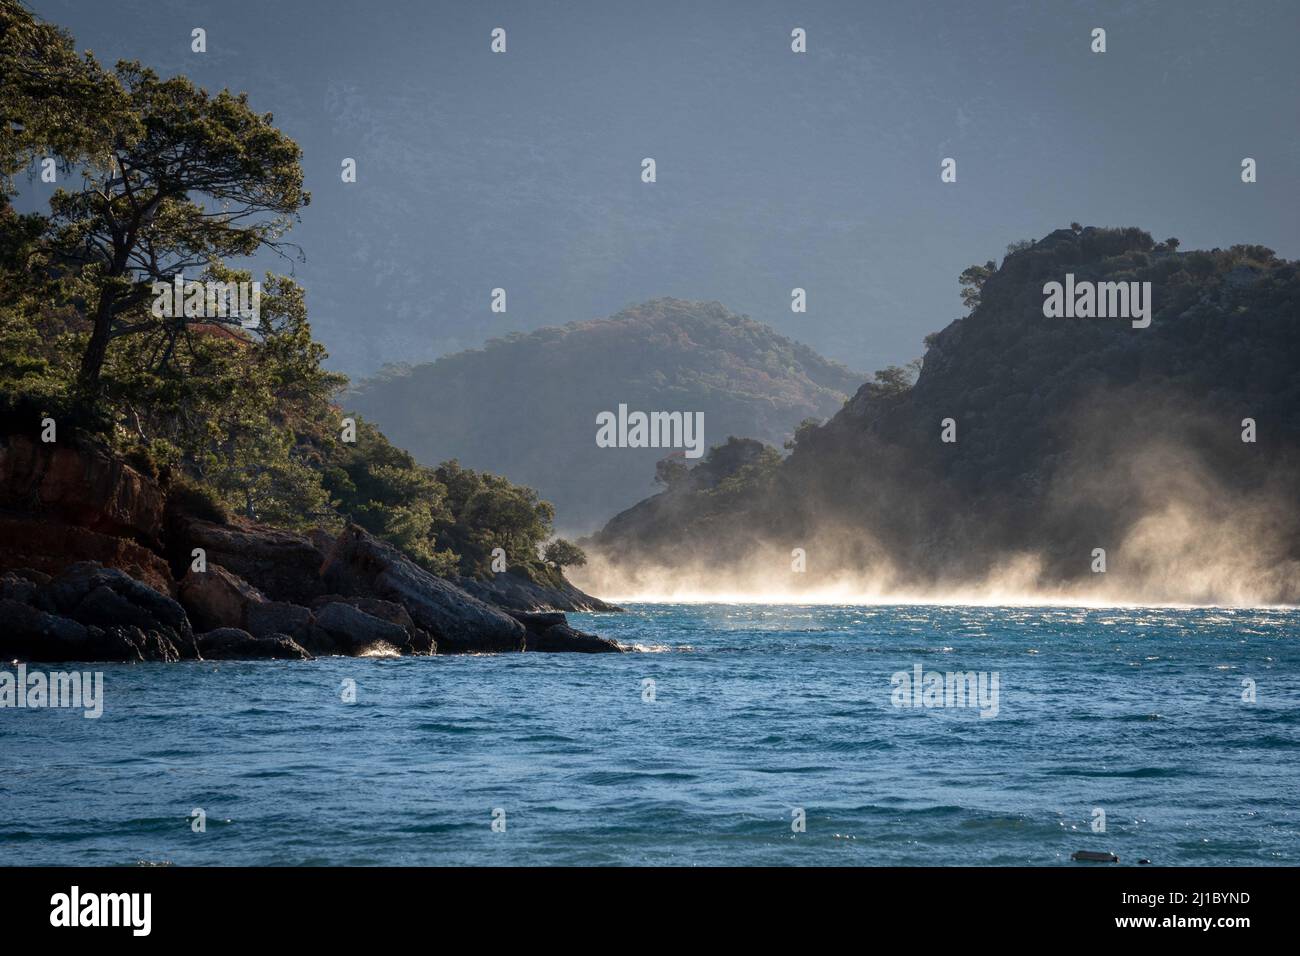 Whirlwinds over the water as the sun rises over the tree covered coast, Turkey Stock Photo